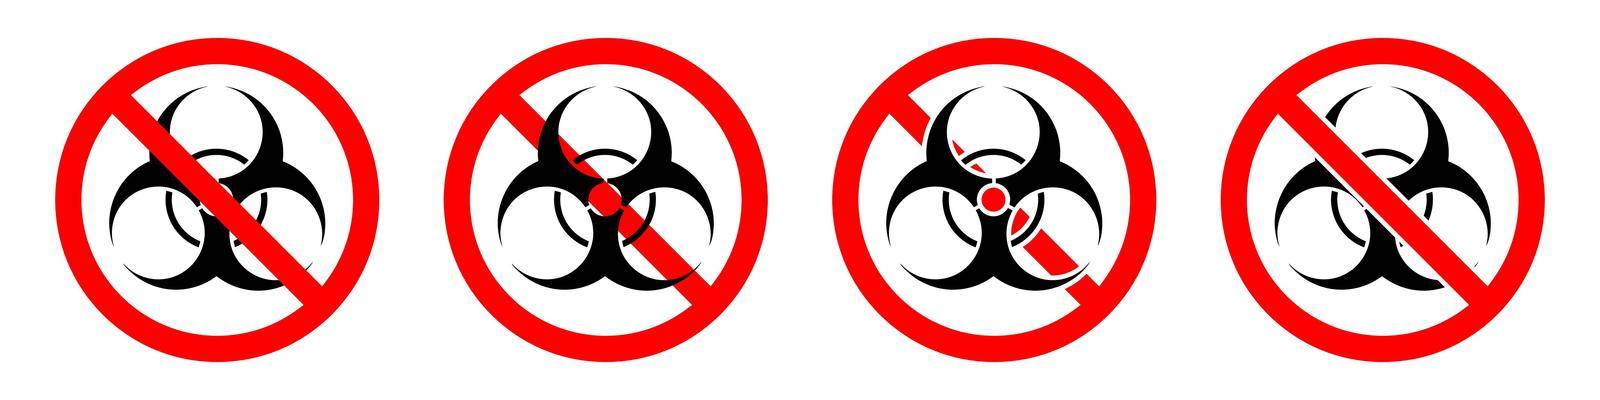 Stop toxic sign. Biohazard icon. Vector illustration. by Chekman